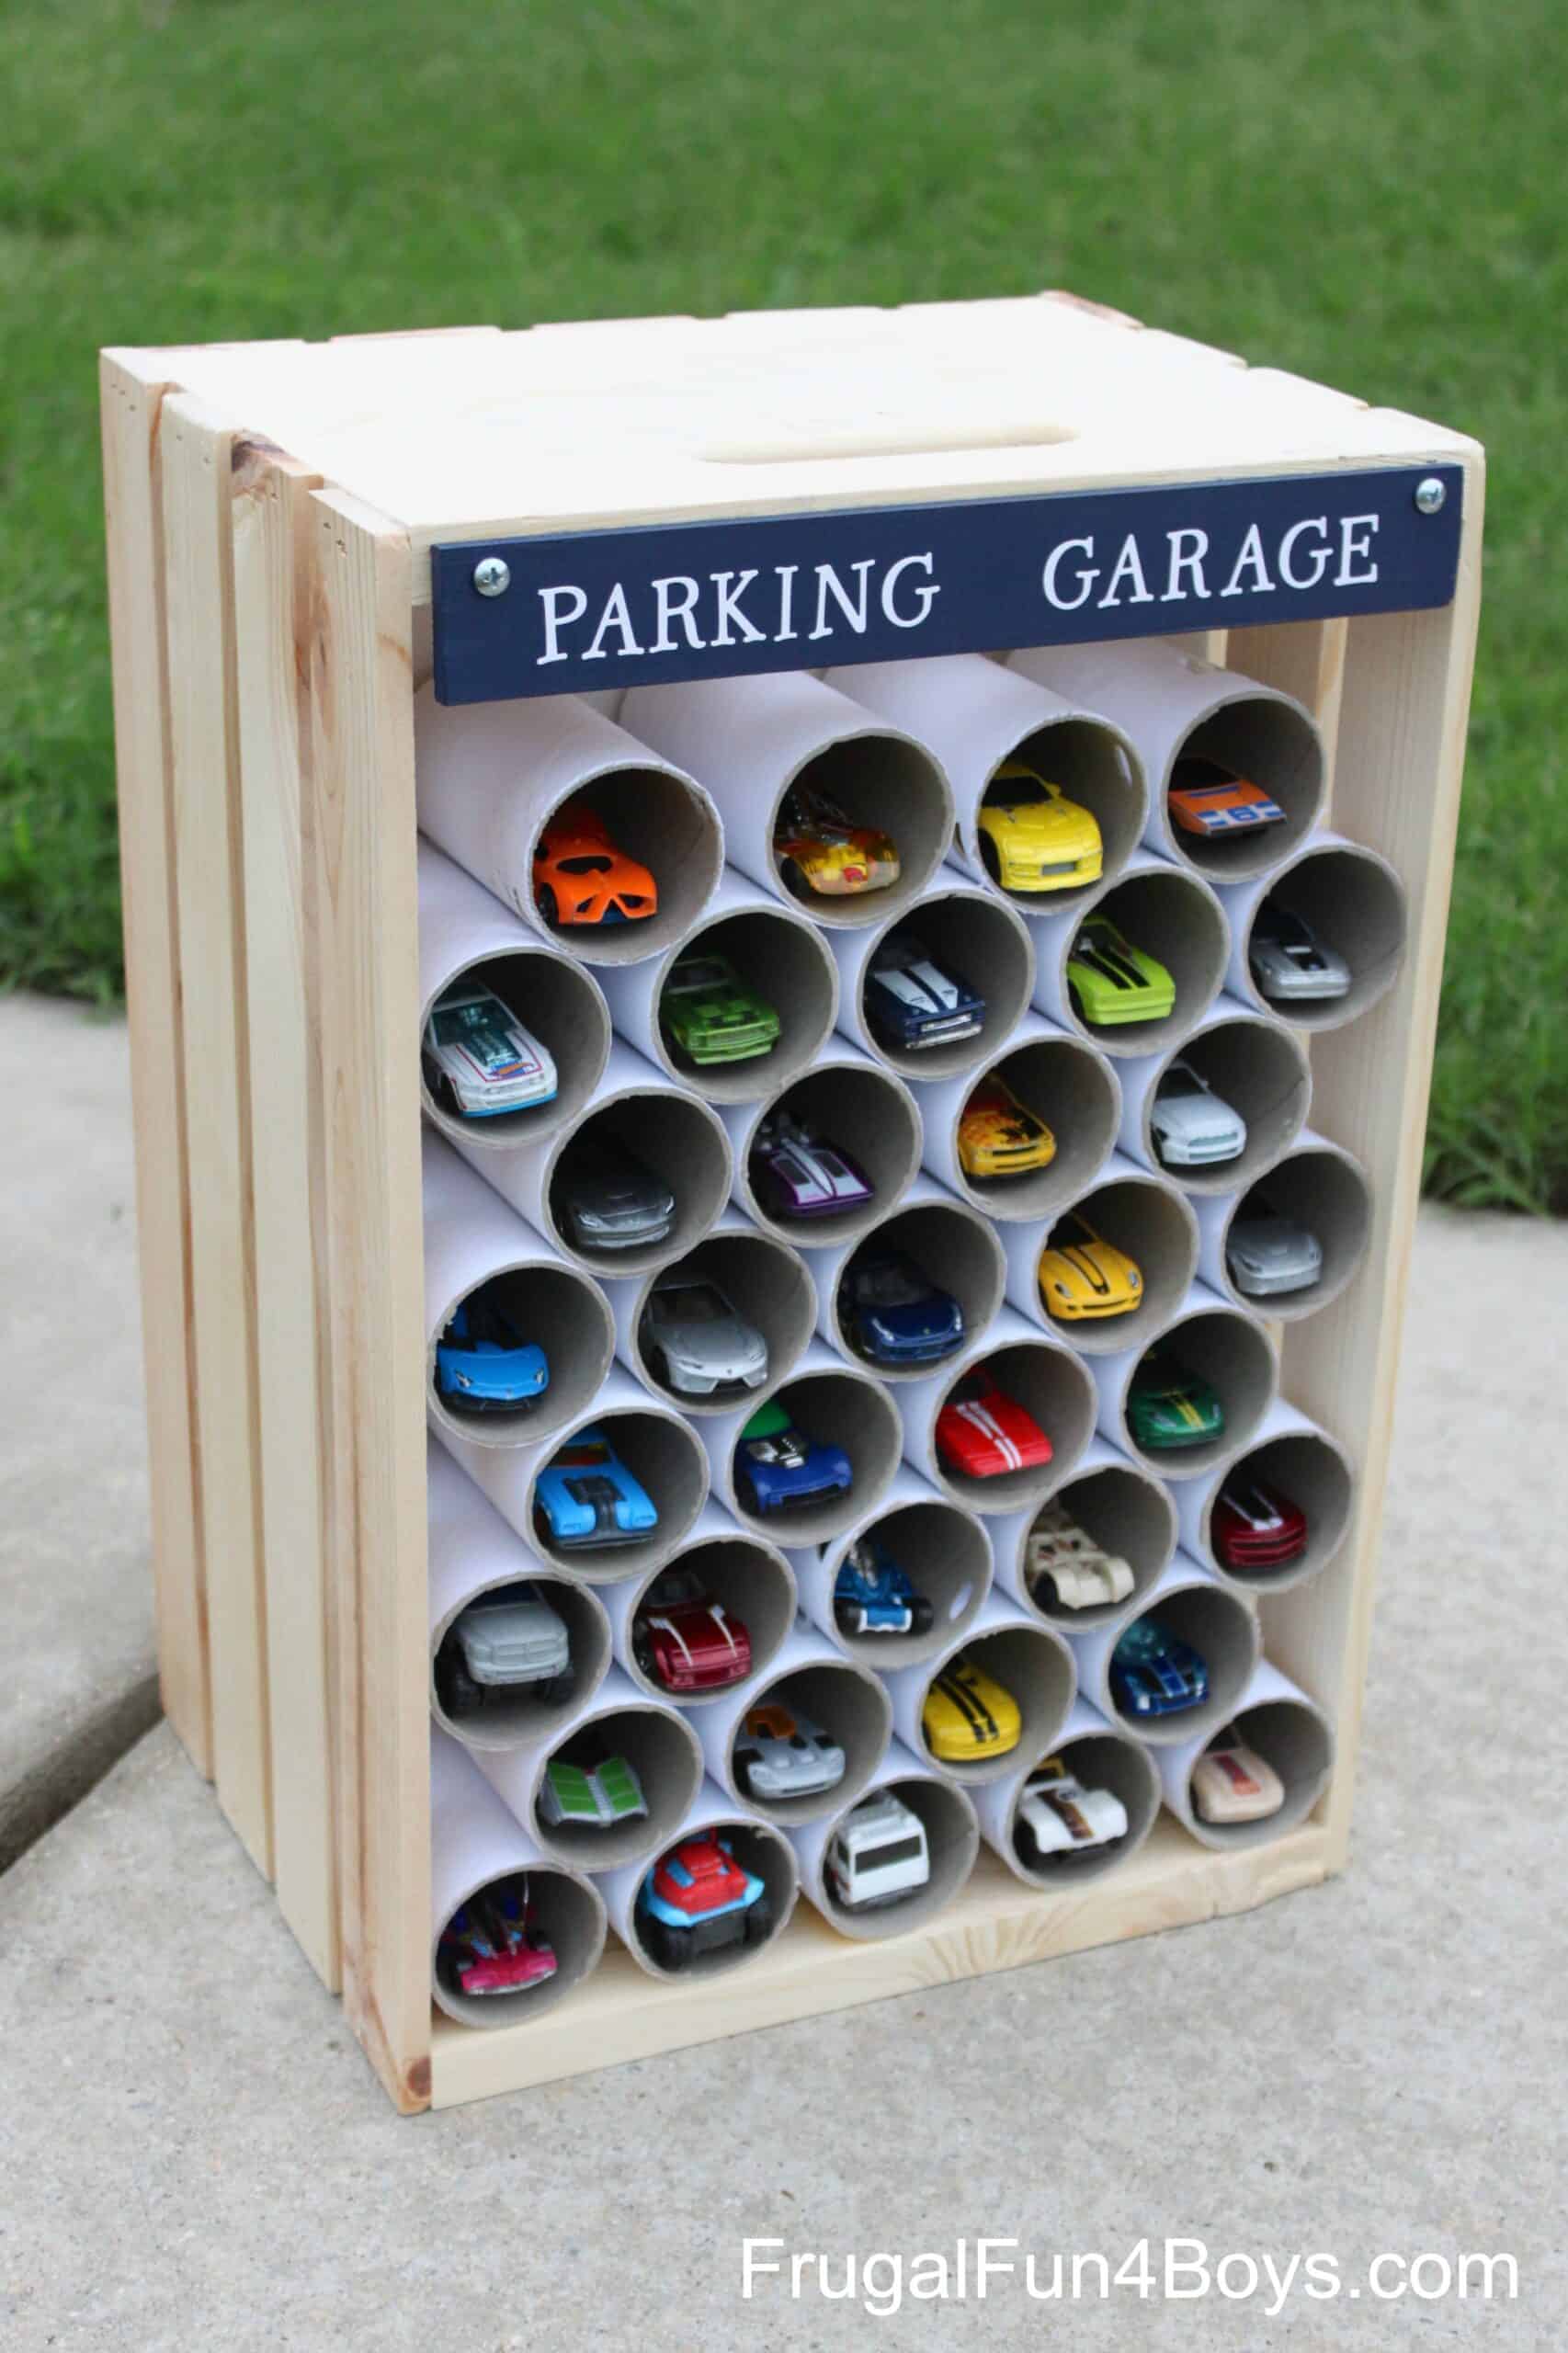 Wooden crate and cardboard pipe toy car parking garage